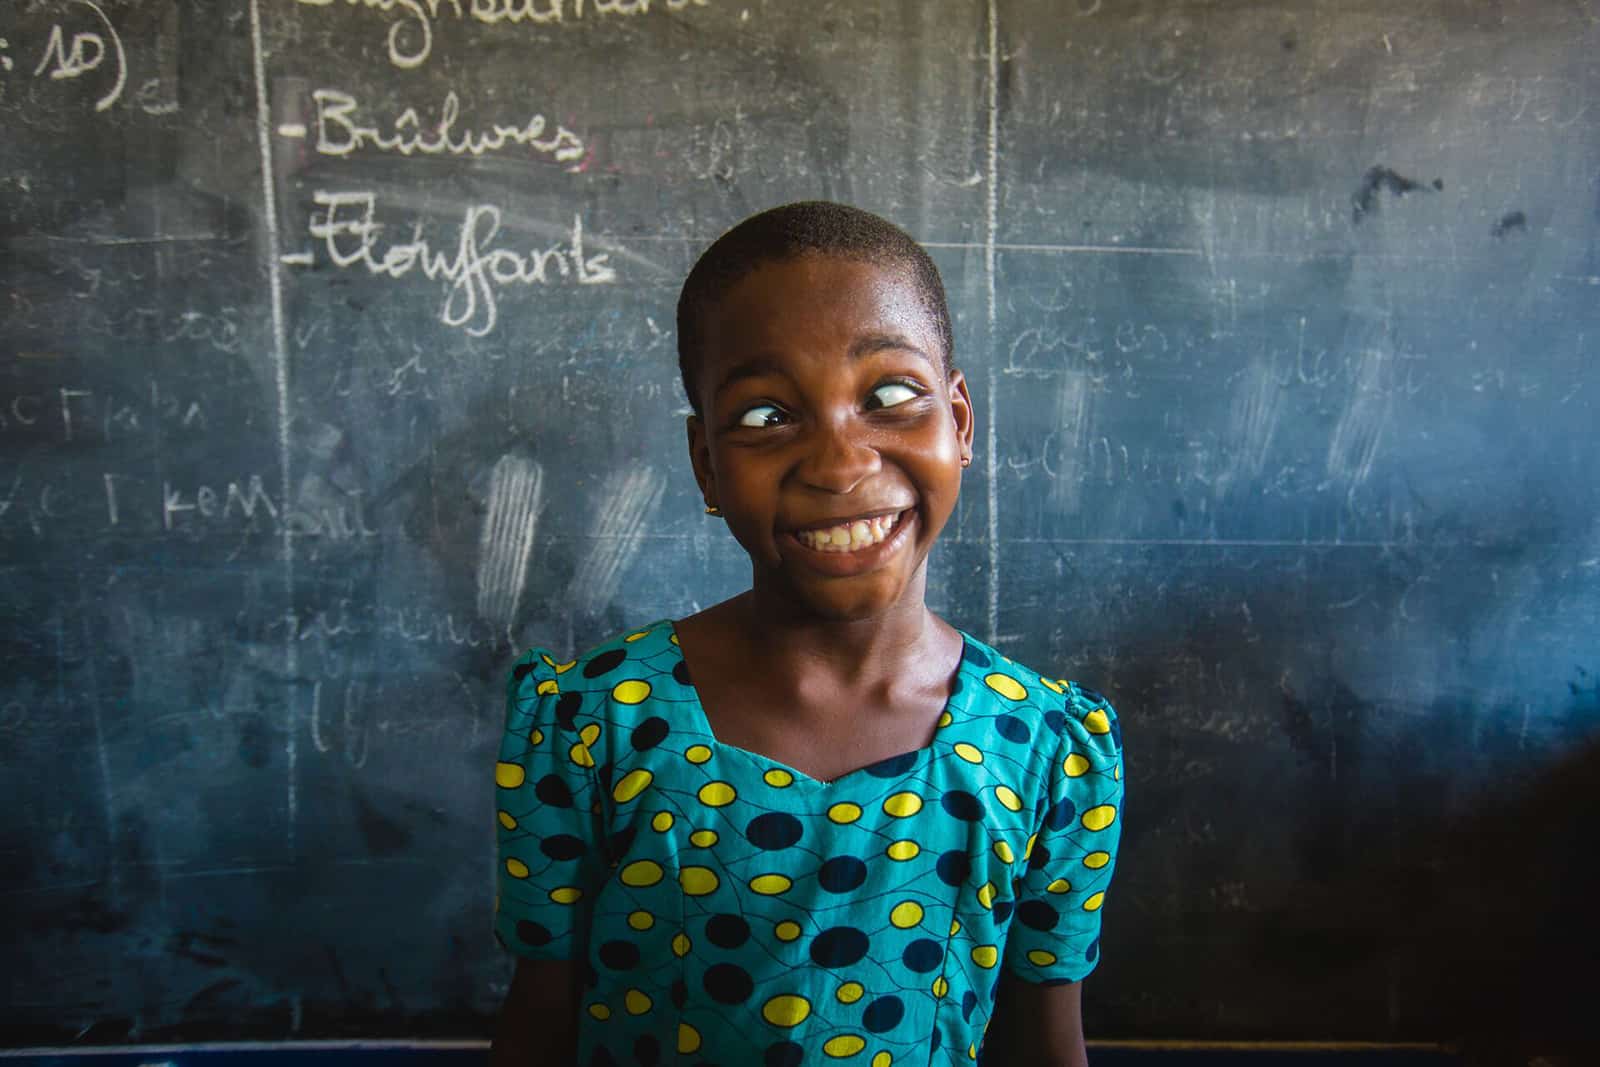 Girl from Togo in front of a chalkboard making a funny face